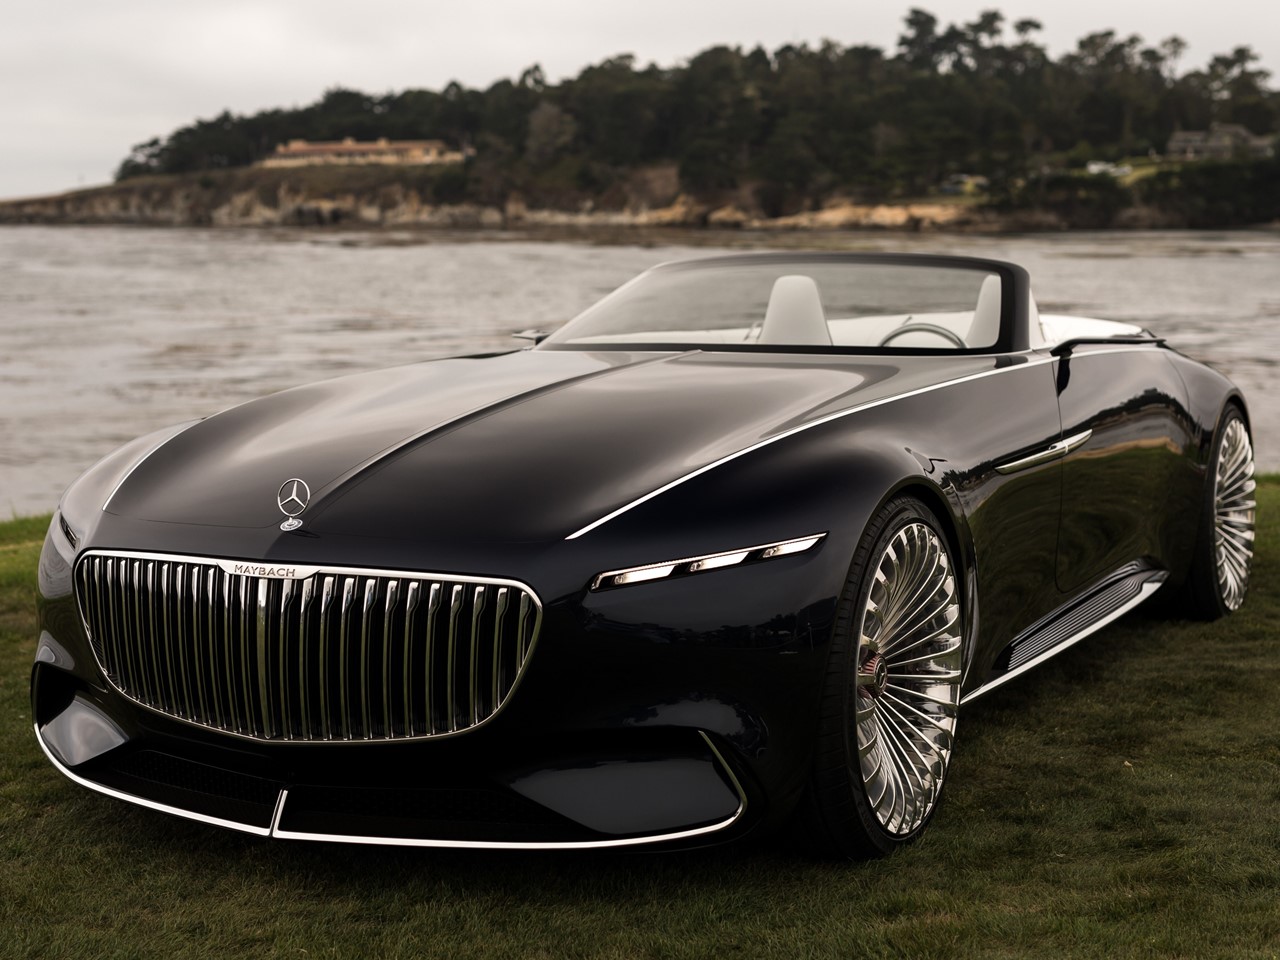 Vision Mercedes Maybach 6 Cabriolet 2017 Wallpapers